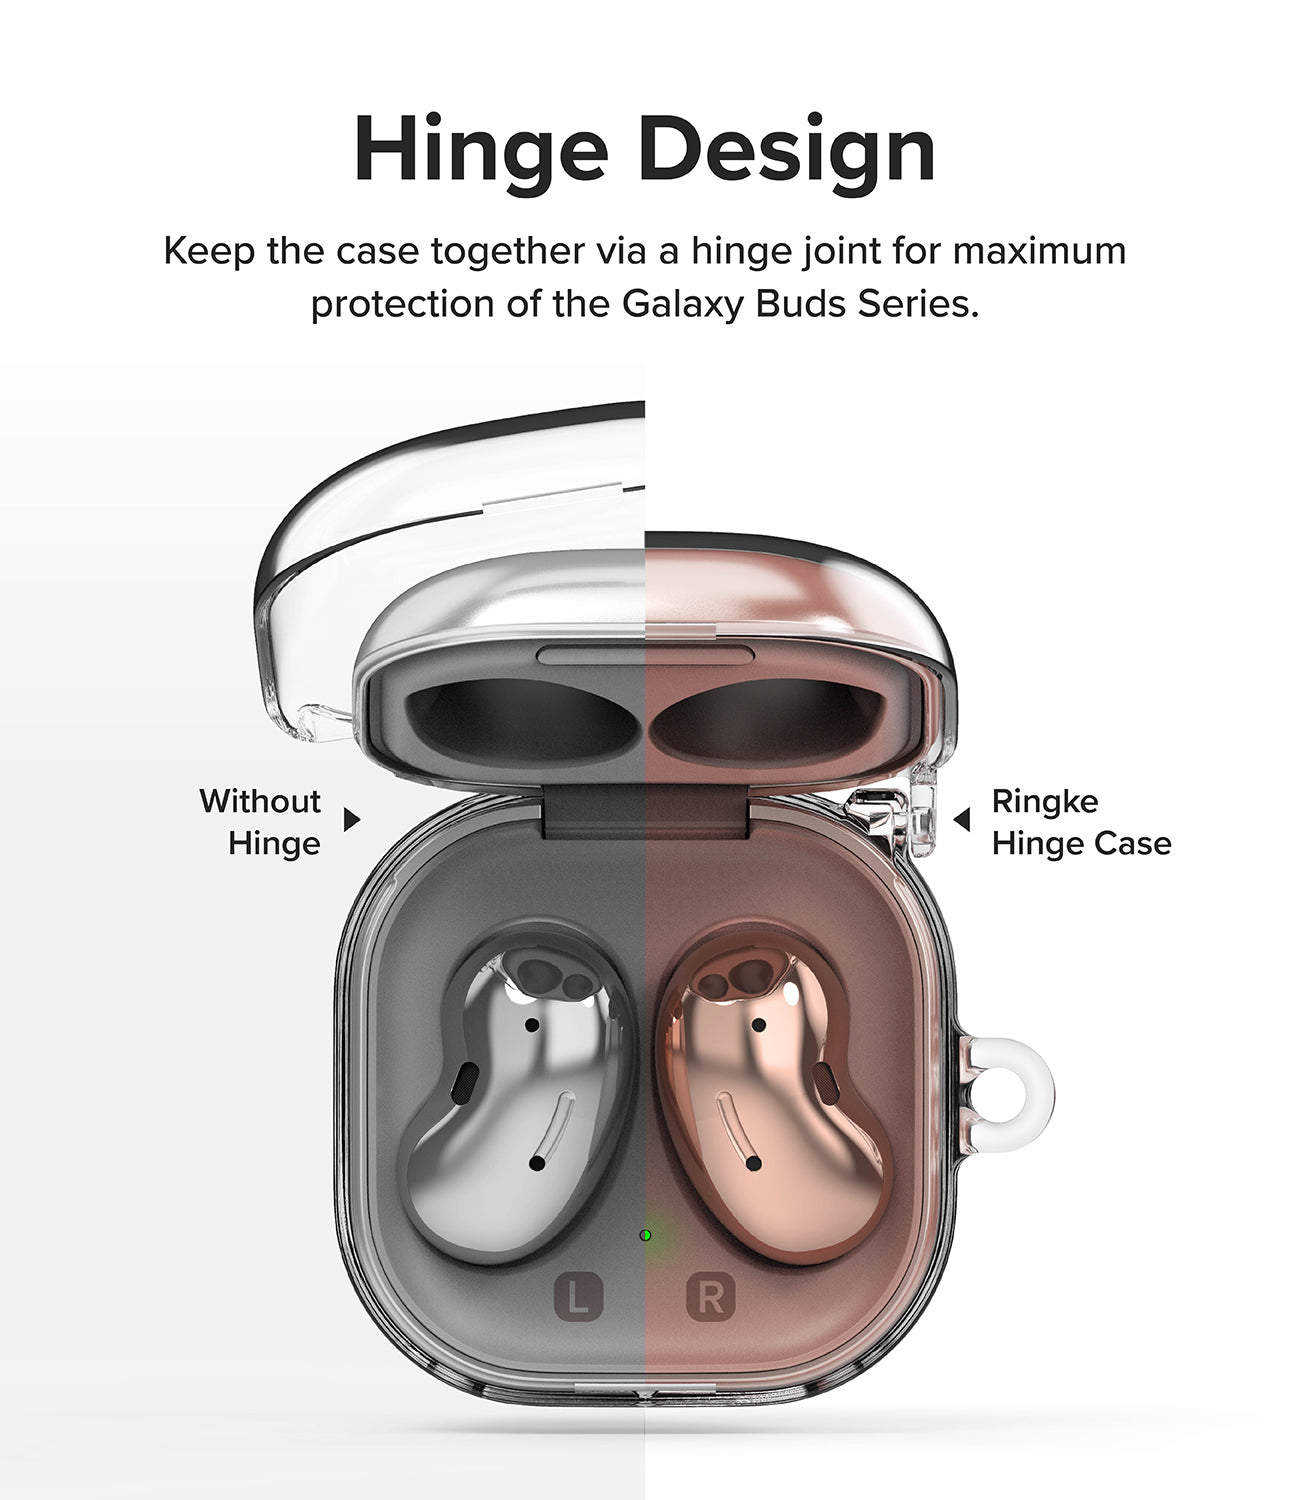 Galaxy Buds FE / 2 Pro / Buds 2 / Galaxy Buds Pro / Live Case | Hinge - Keep the case together via a hinge joint for maximum protection of the Galaxy Buds 2 Pro, Buds FE, Buds 2, Buds Pro, Buds Live